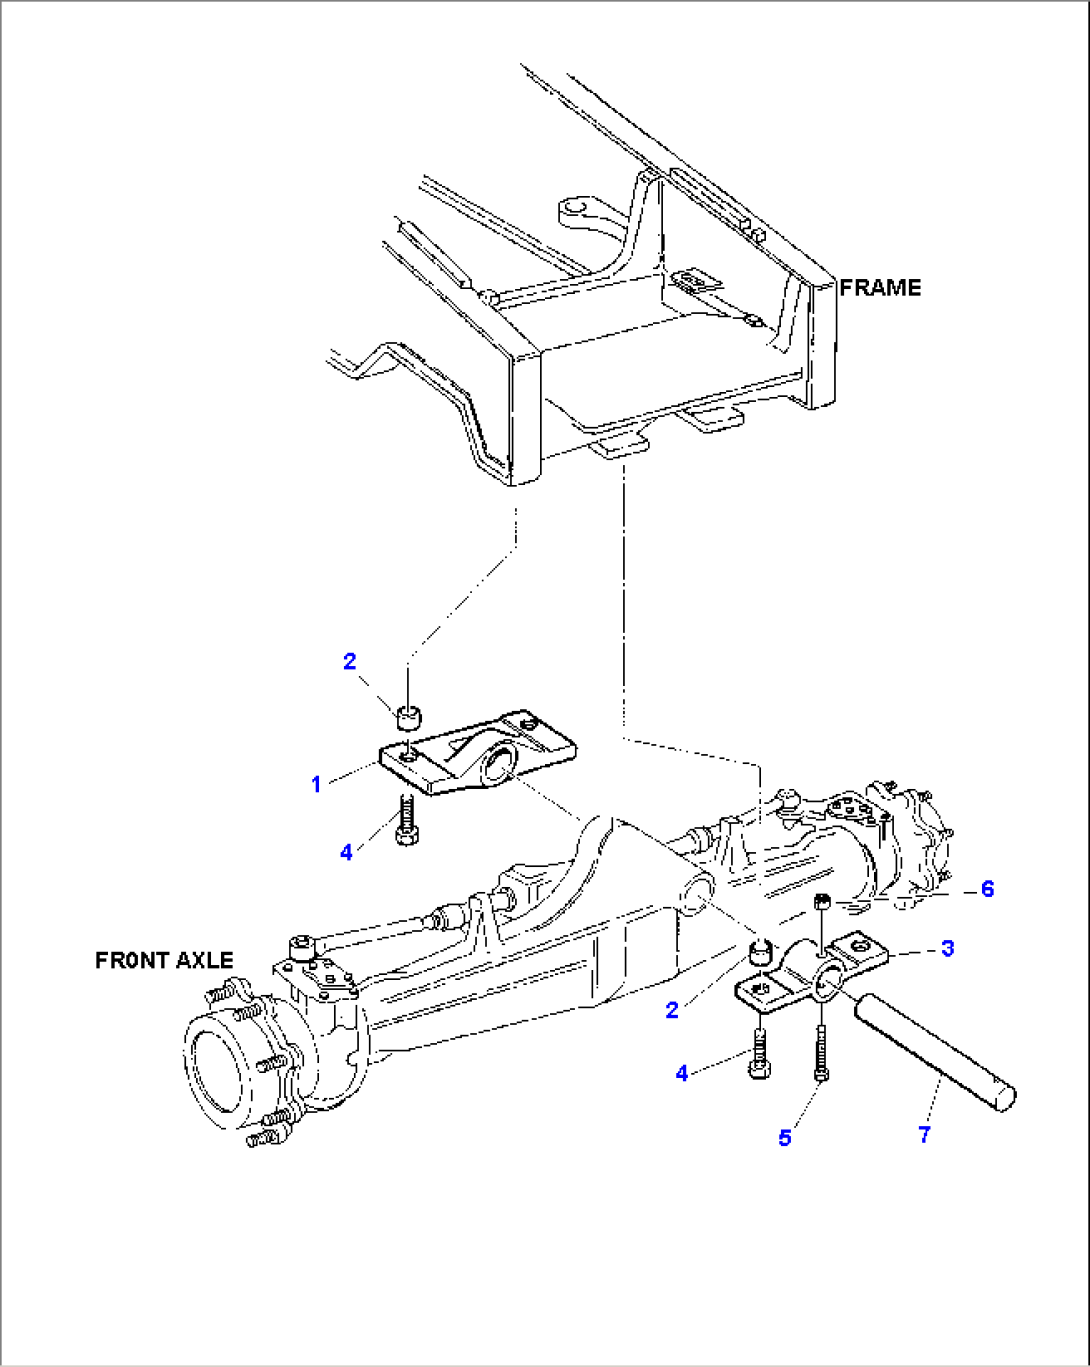 FRONT AXLE FIXING (2WD)